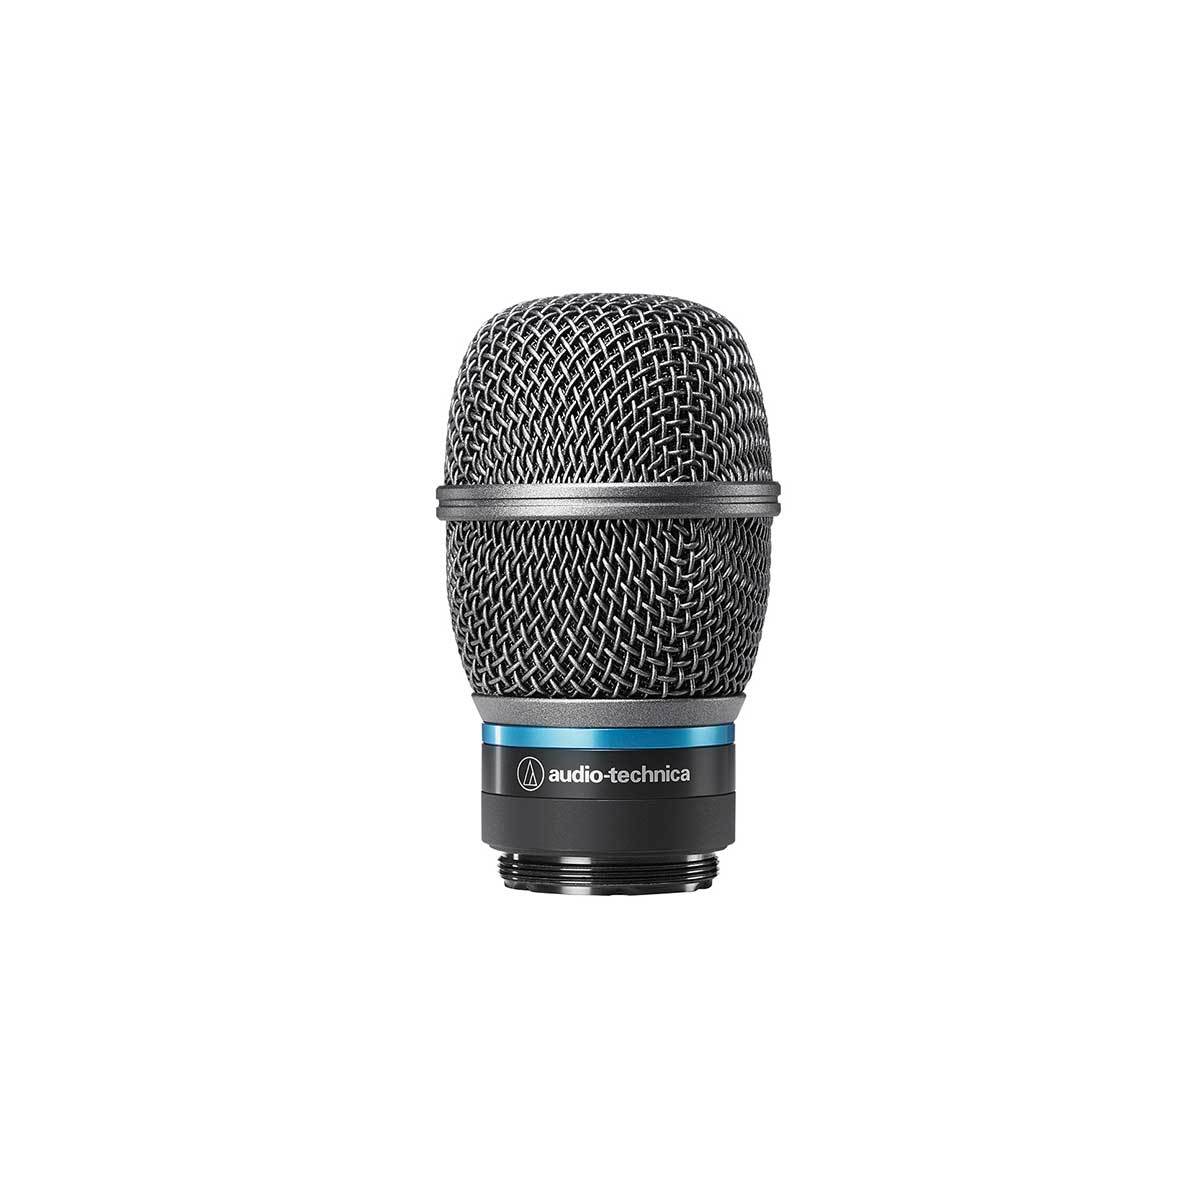 Wireless Systems - Audio-Technica ATW-C3300 Interchangeable Cardioid Condenser Microphone Capsule